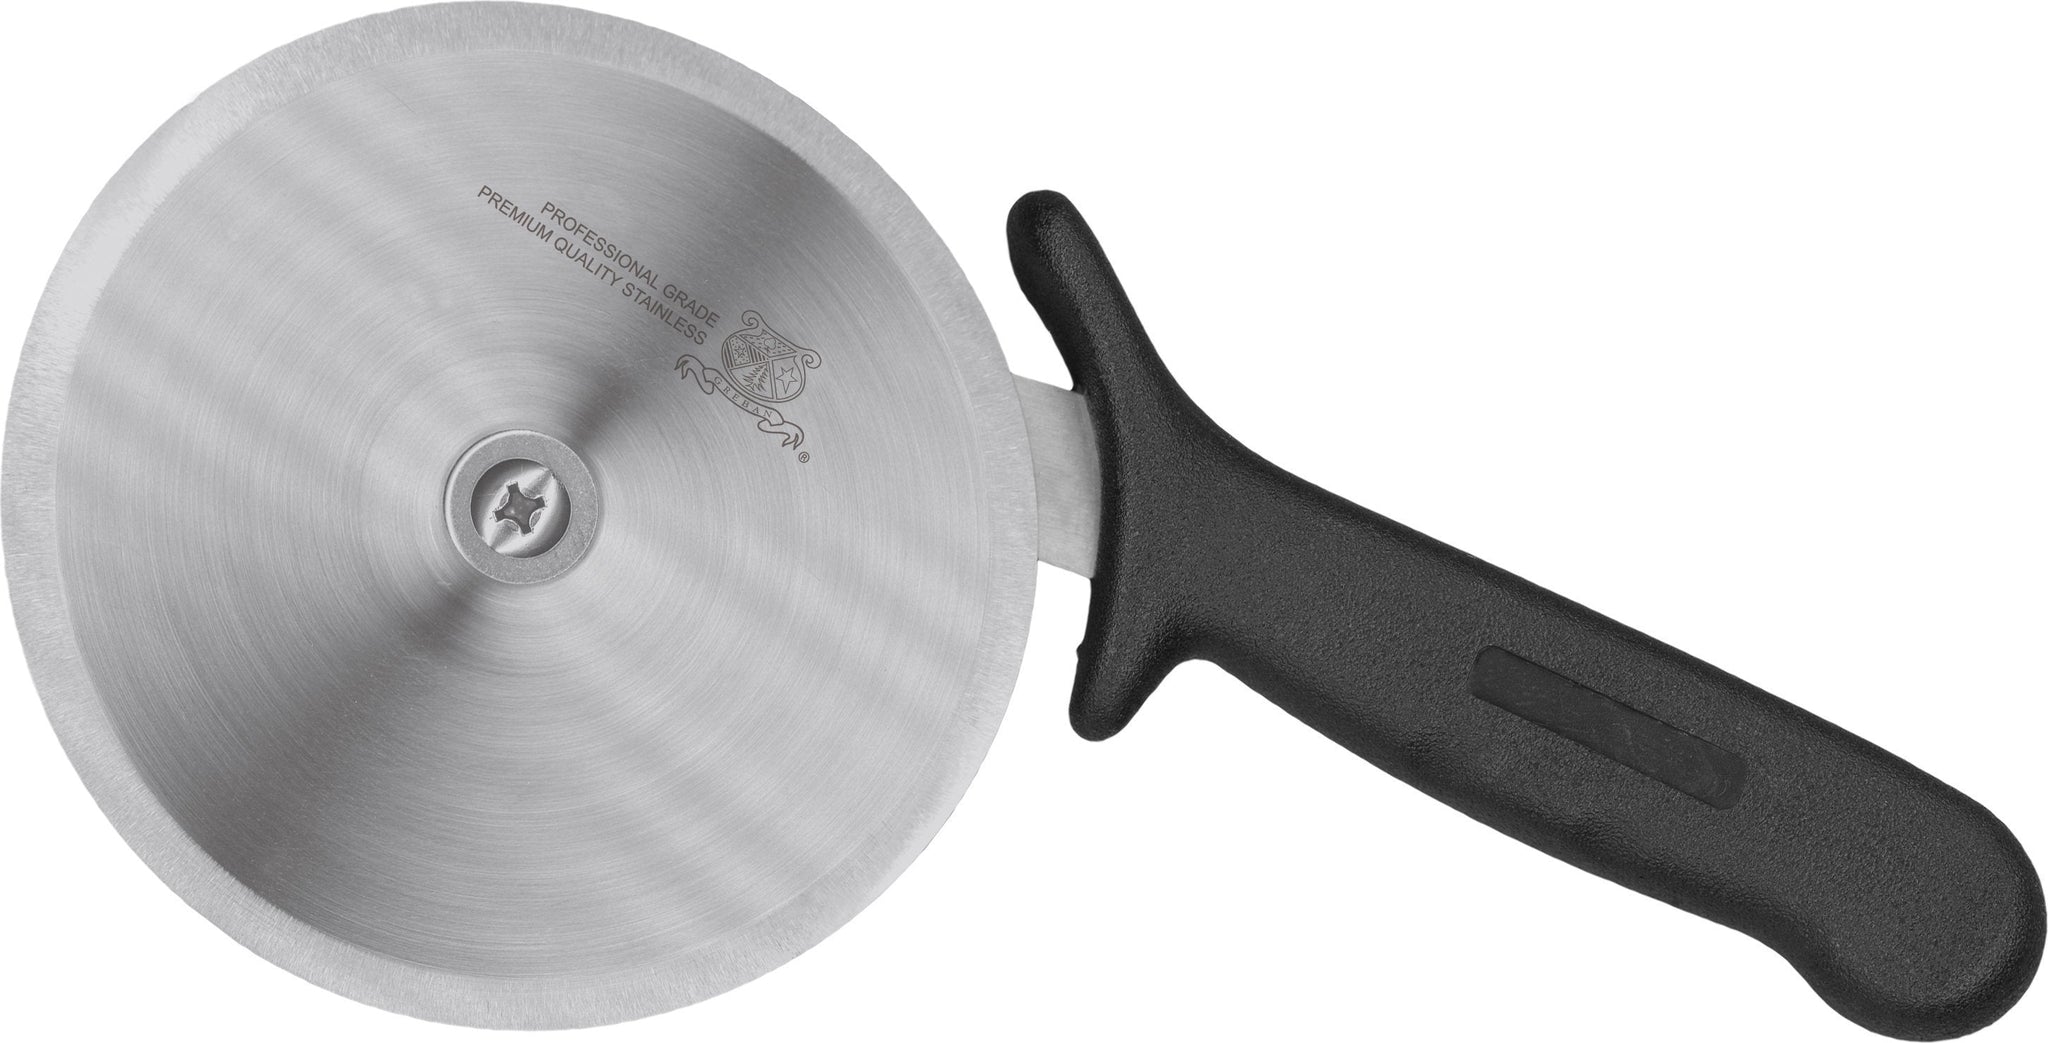 Omcan - 5” R-Style Pizza Cutter with Black Handle, 10/cs - 20428